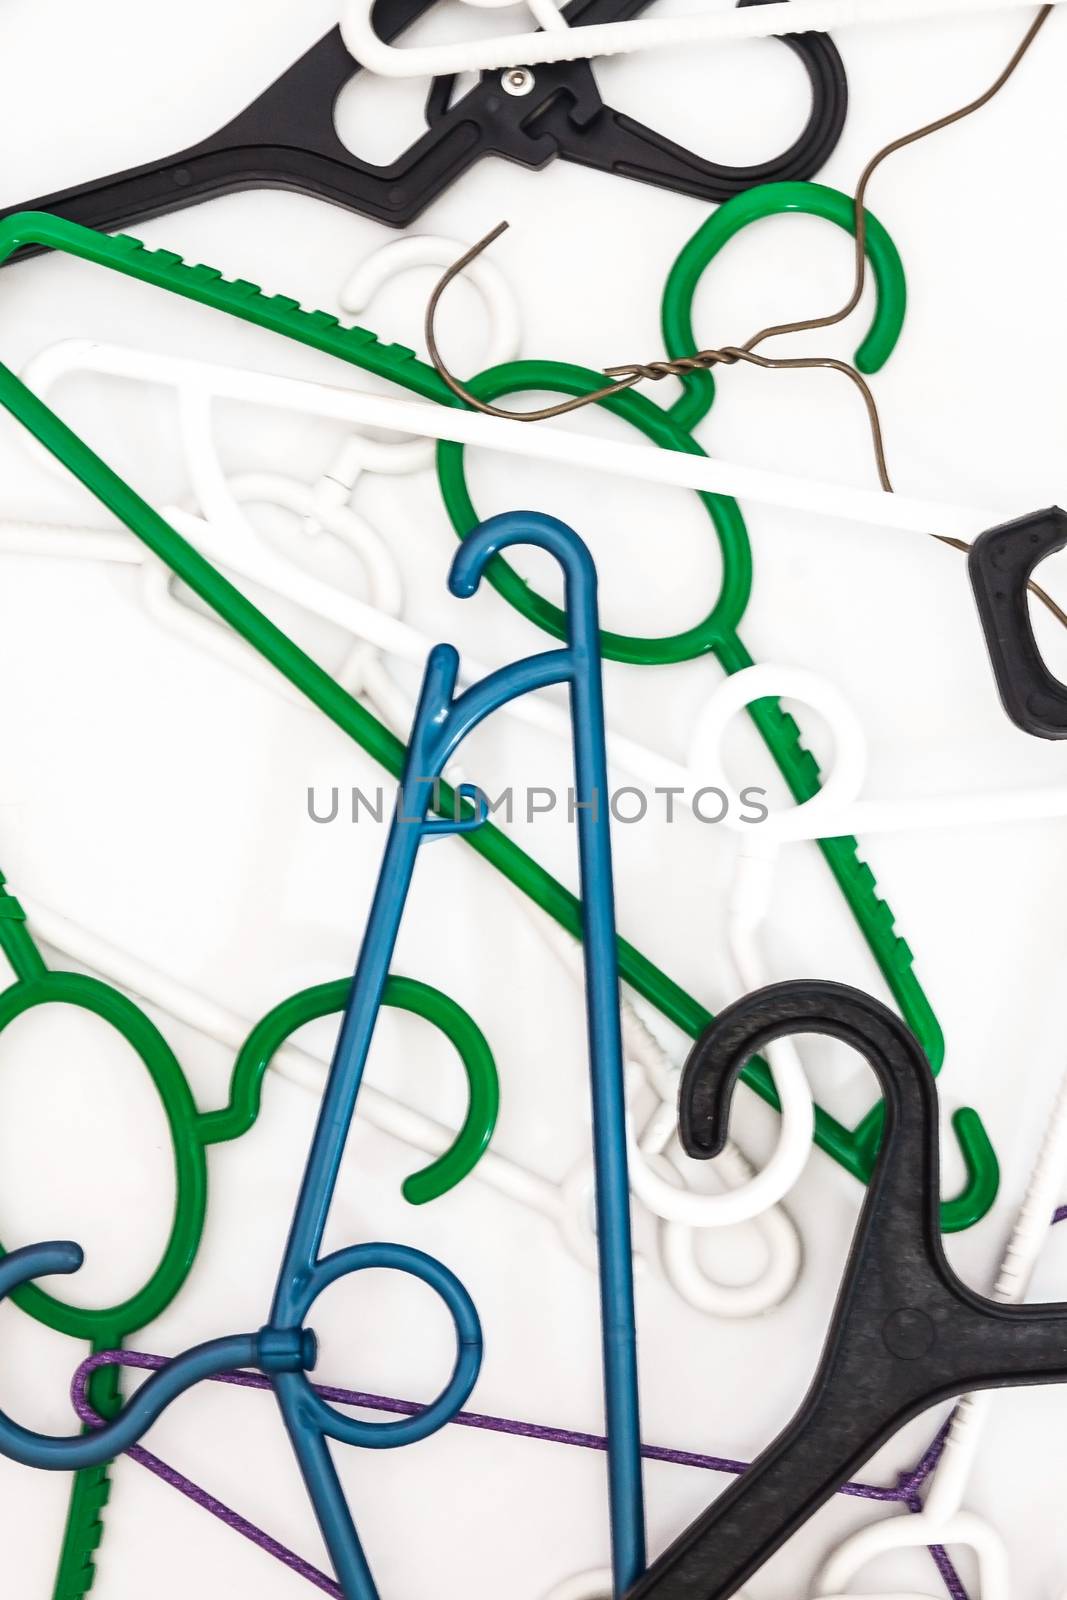 Many hangers of different shapes and colors, top view, white background.